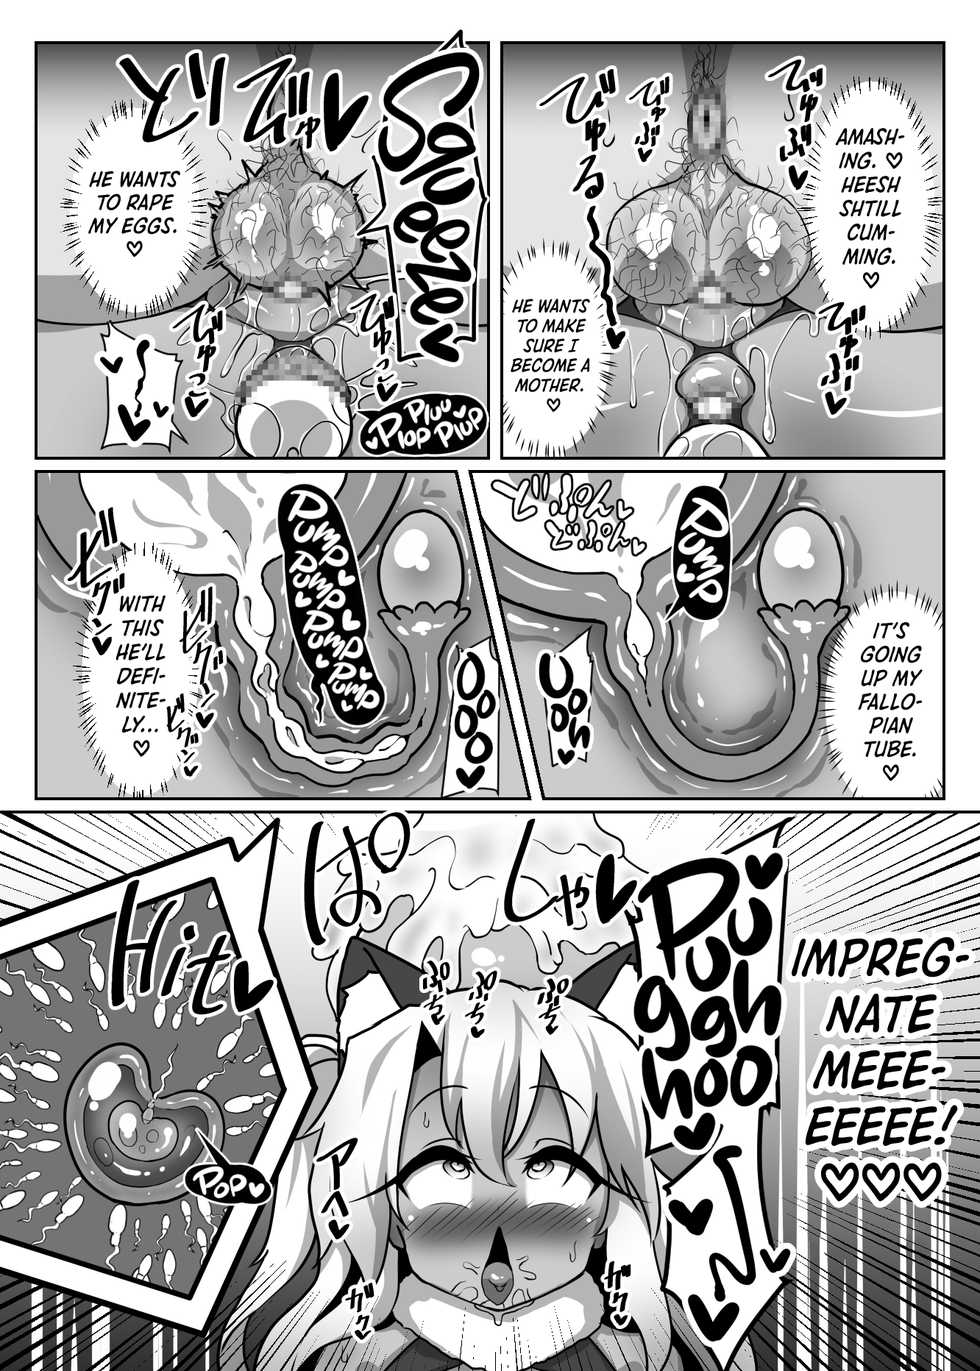 [Kotee] A book where Chloe-chan pretends to be hypnotized and relentlessly gives birth over and over to a disgusting old micro-dicked virgin’s babies. (Fate/kaleid liner Prisma Illya) [English] [Secluded] [Digital] - Page 27